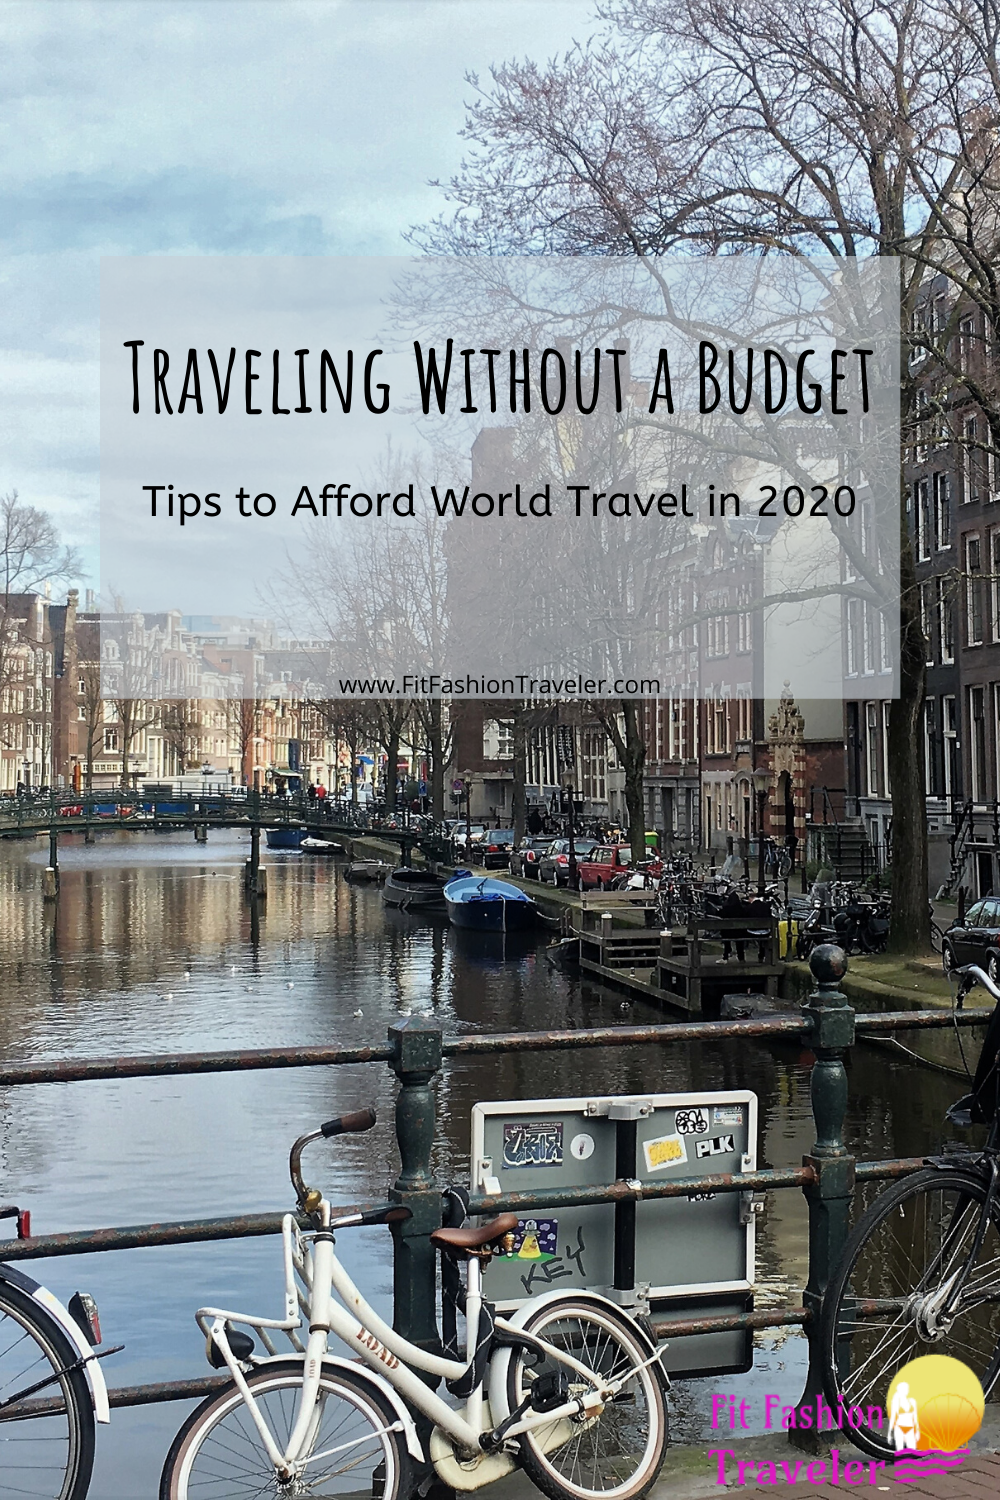 Best 12 Travel Tips for Millennials to Afford Travel in 2020